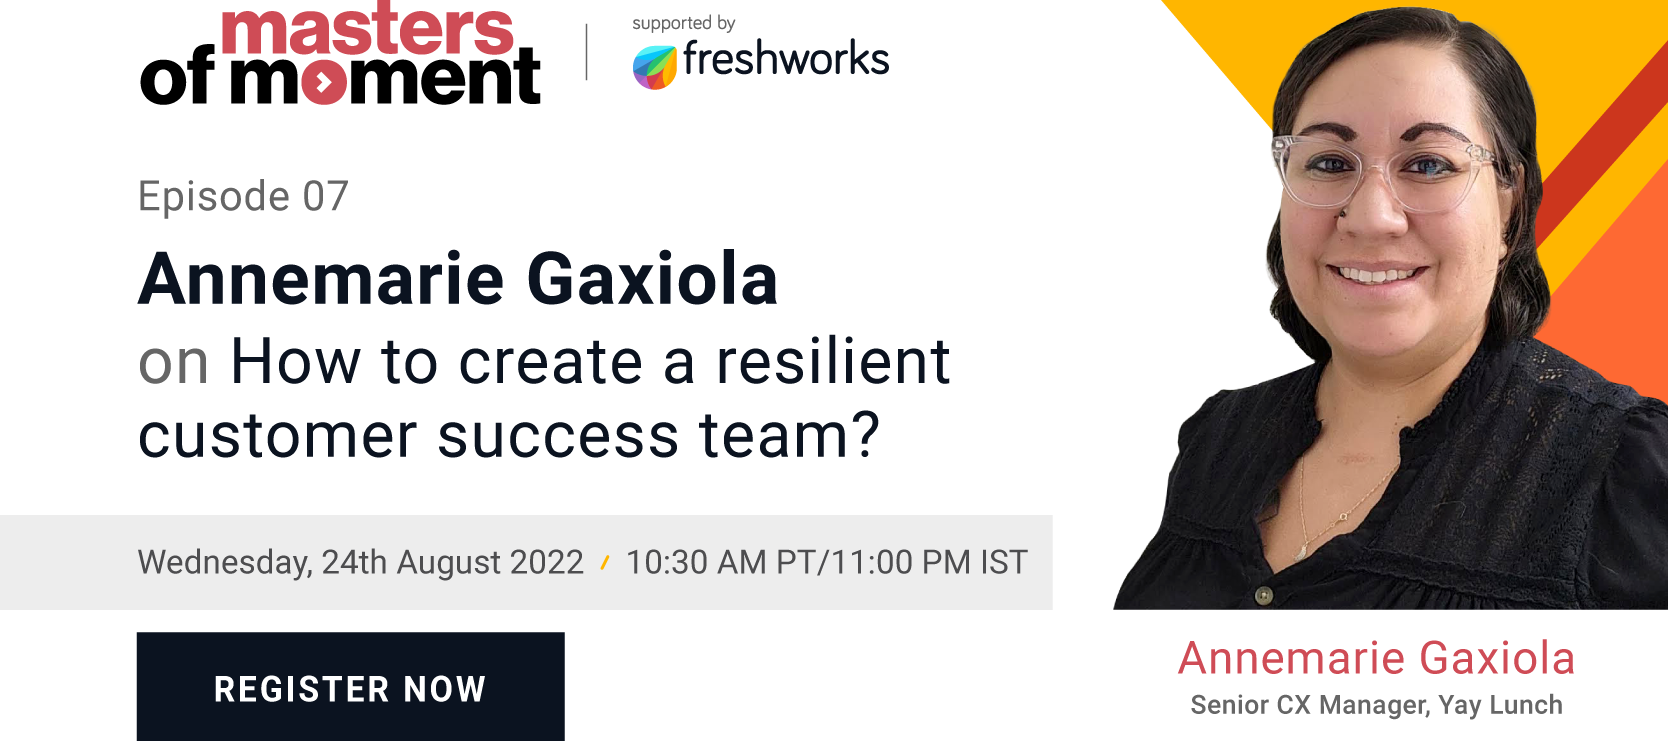 Masters of Moment: Annemarie Gaxiola, on how to create a resilient customer success team